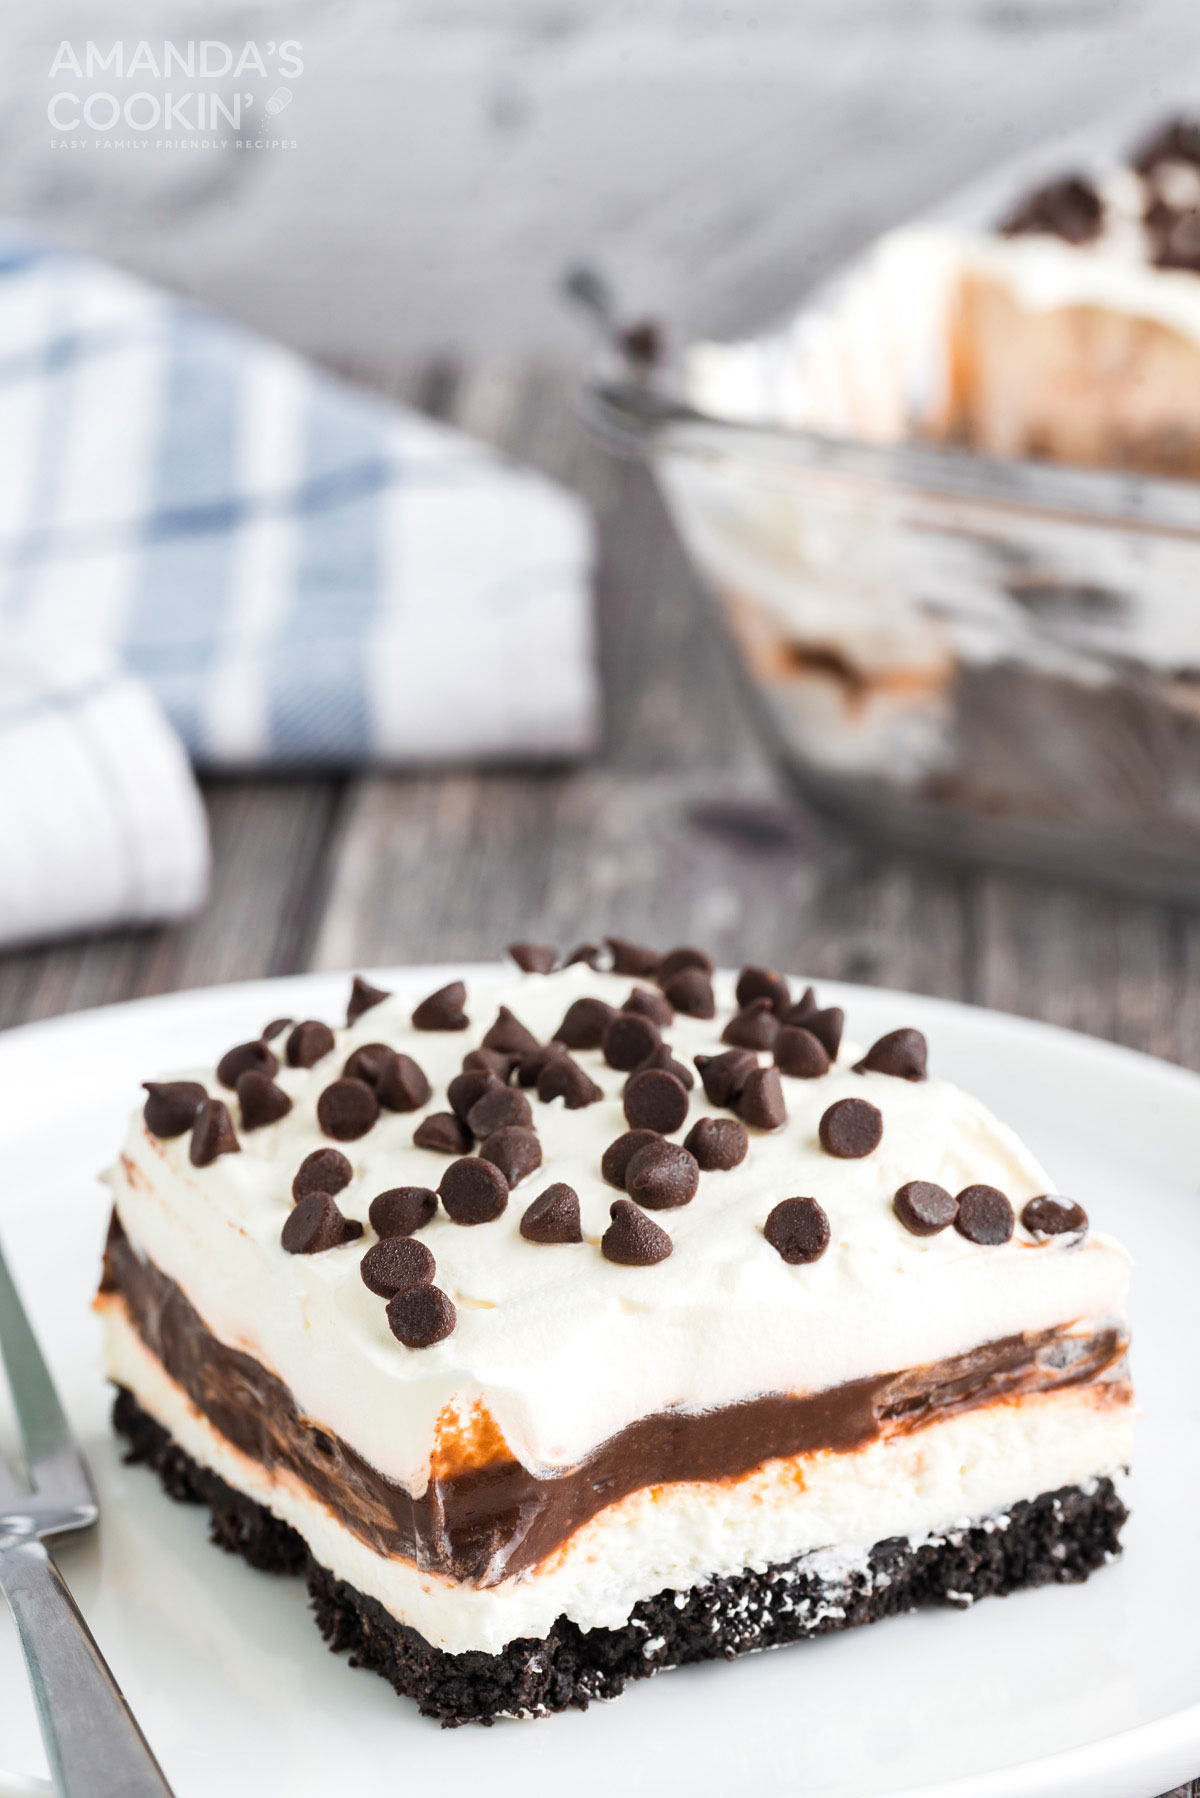 Chocolate lasagna is a no baked layered dessert made with cookies, cream cheese, whipped cream and chocolate pudding. It's a chocolate dessert dream!